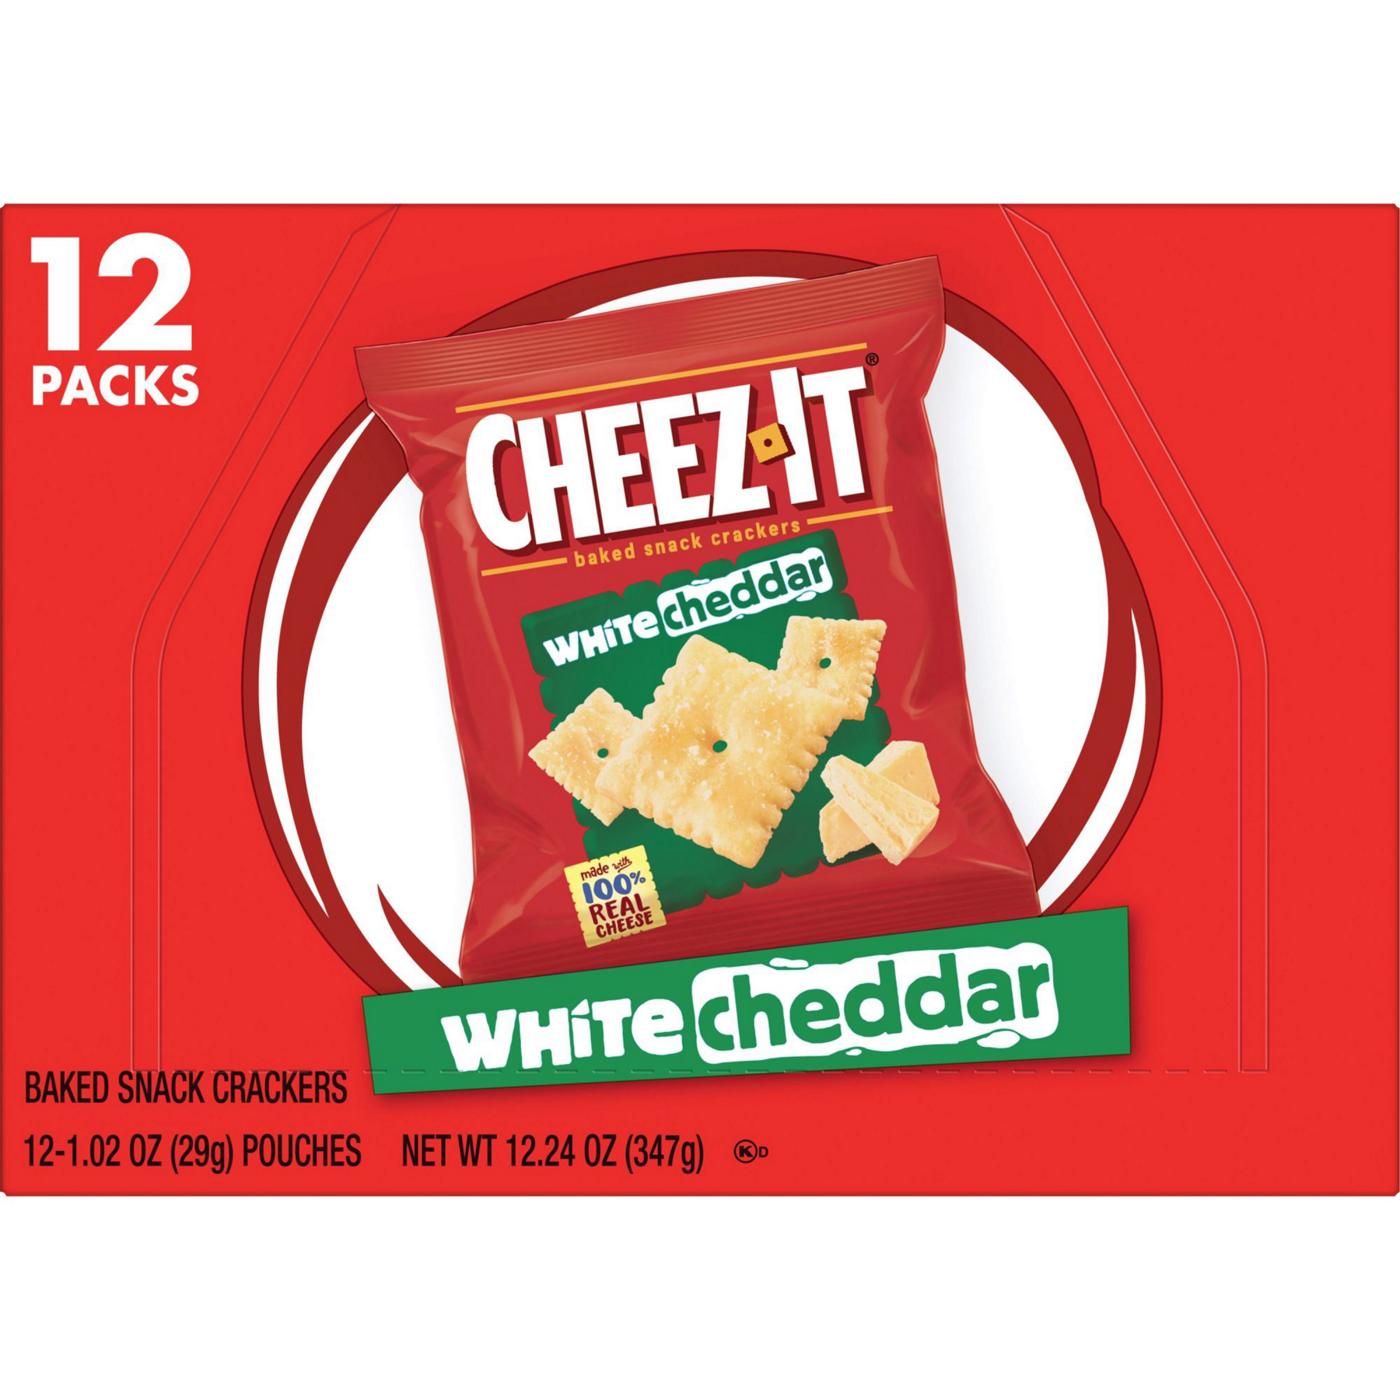 Cheez-It White Cheddar Baked Snack Crackers; image 1 of 4